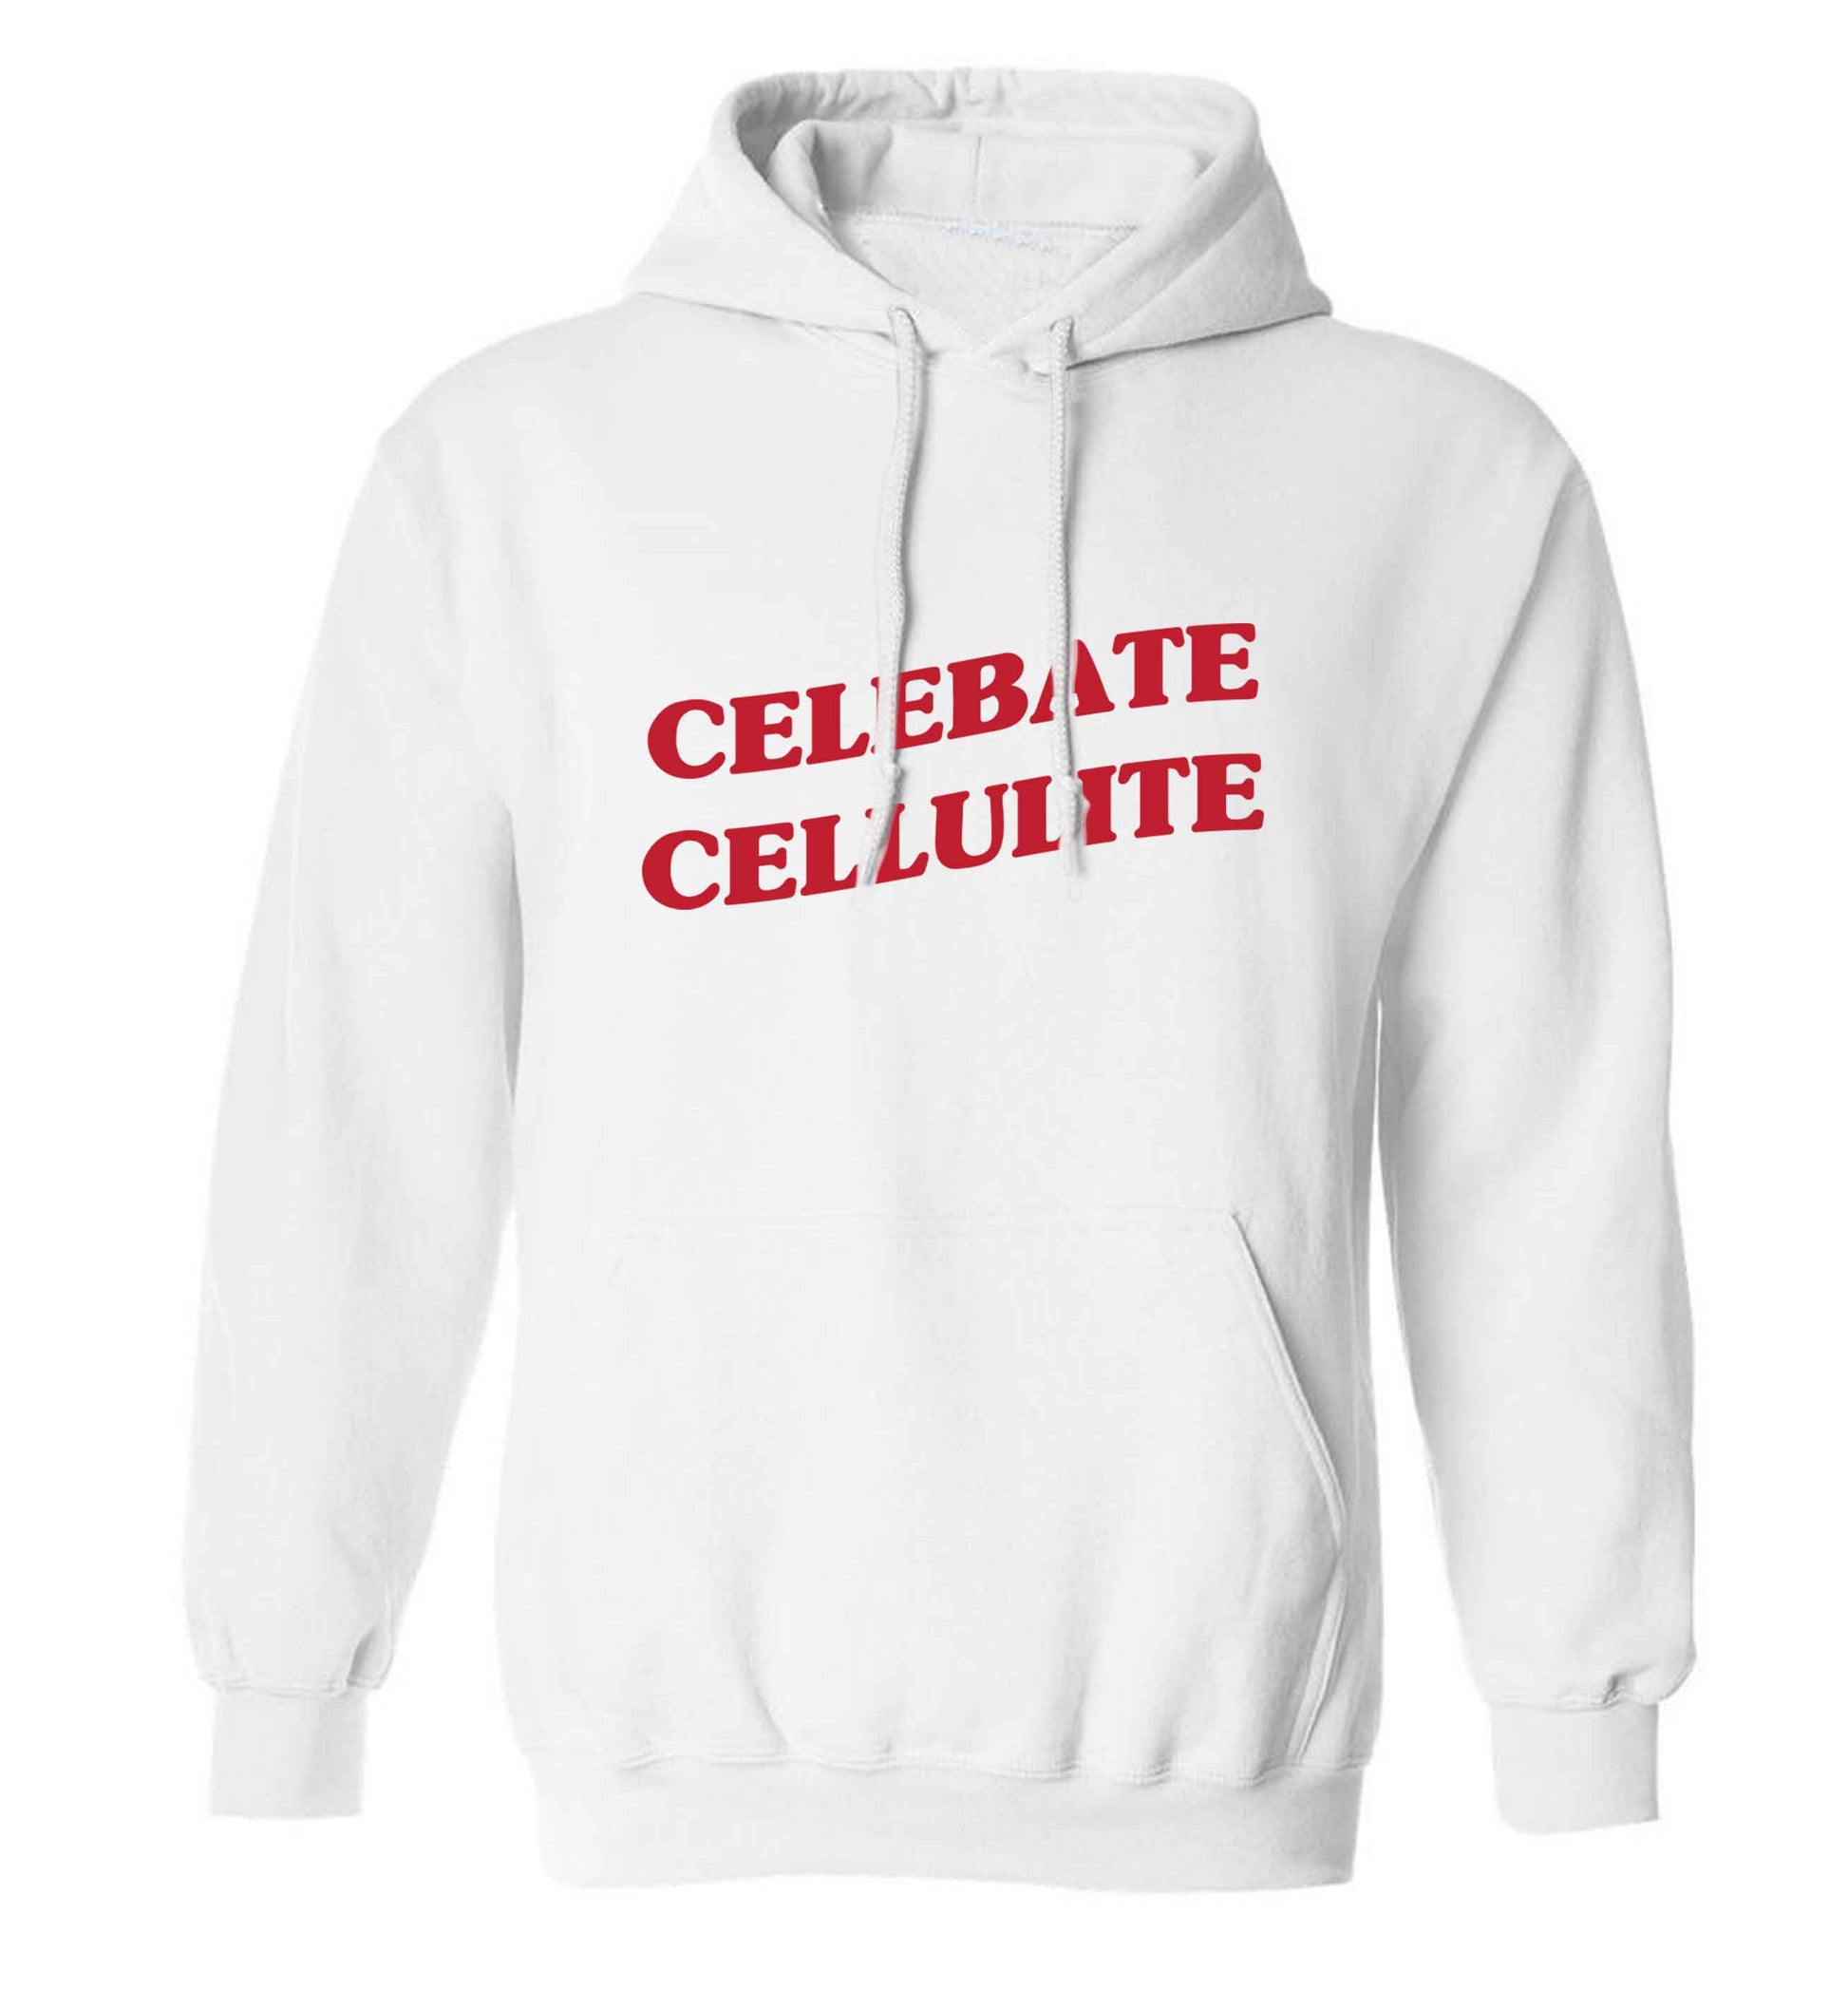 Celebrate cellulite adults unisex white hoodie 2XL